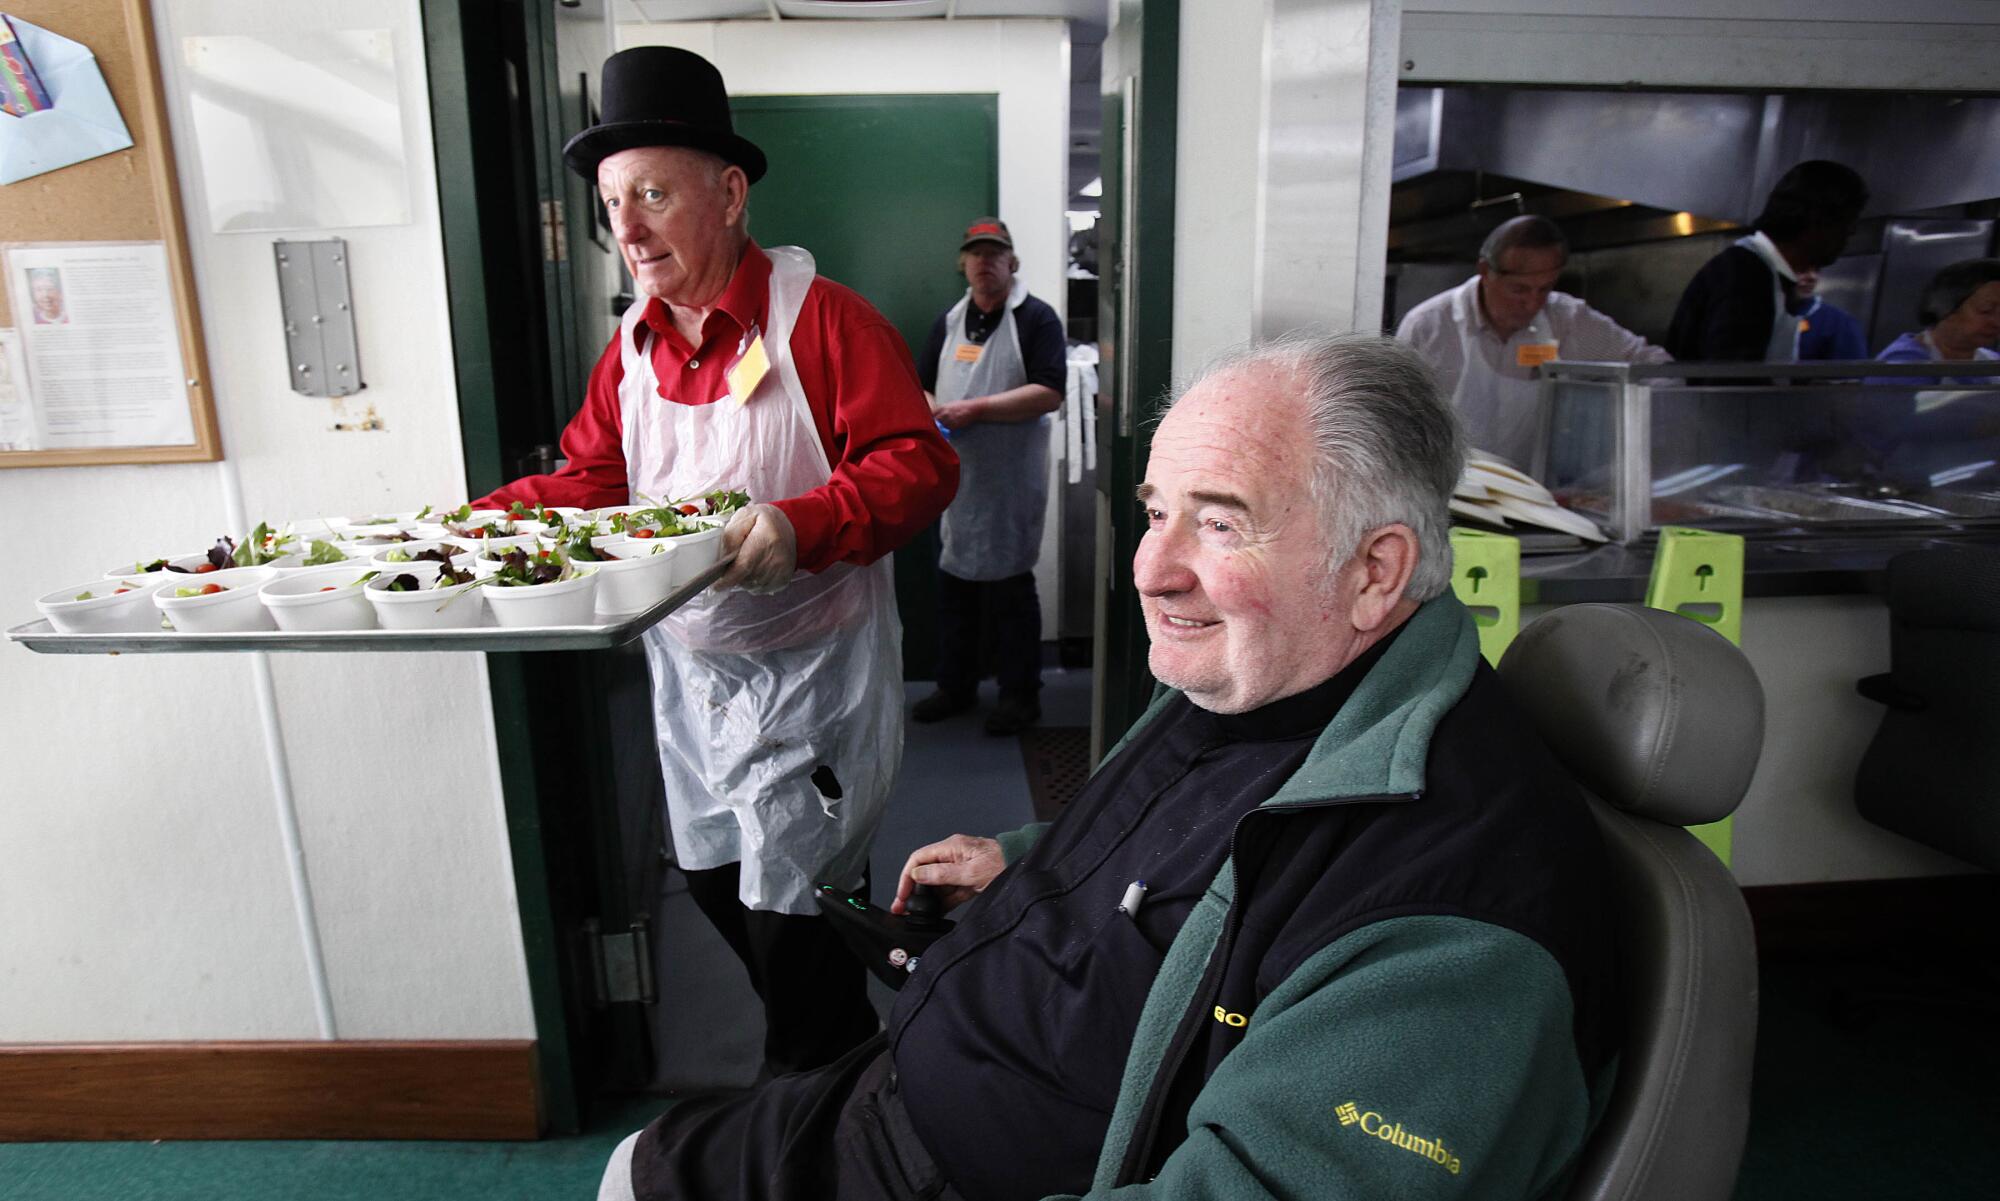 Steve Conner brings out a tray of individual salads near Father Joe Carroll